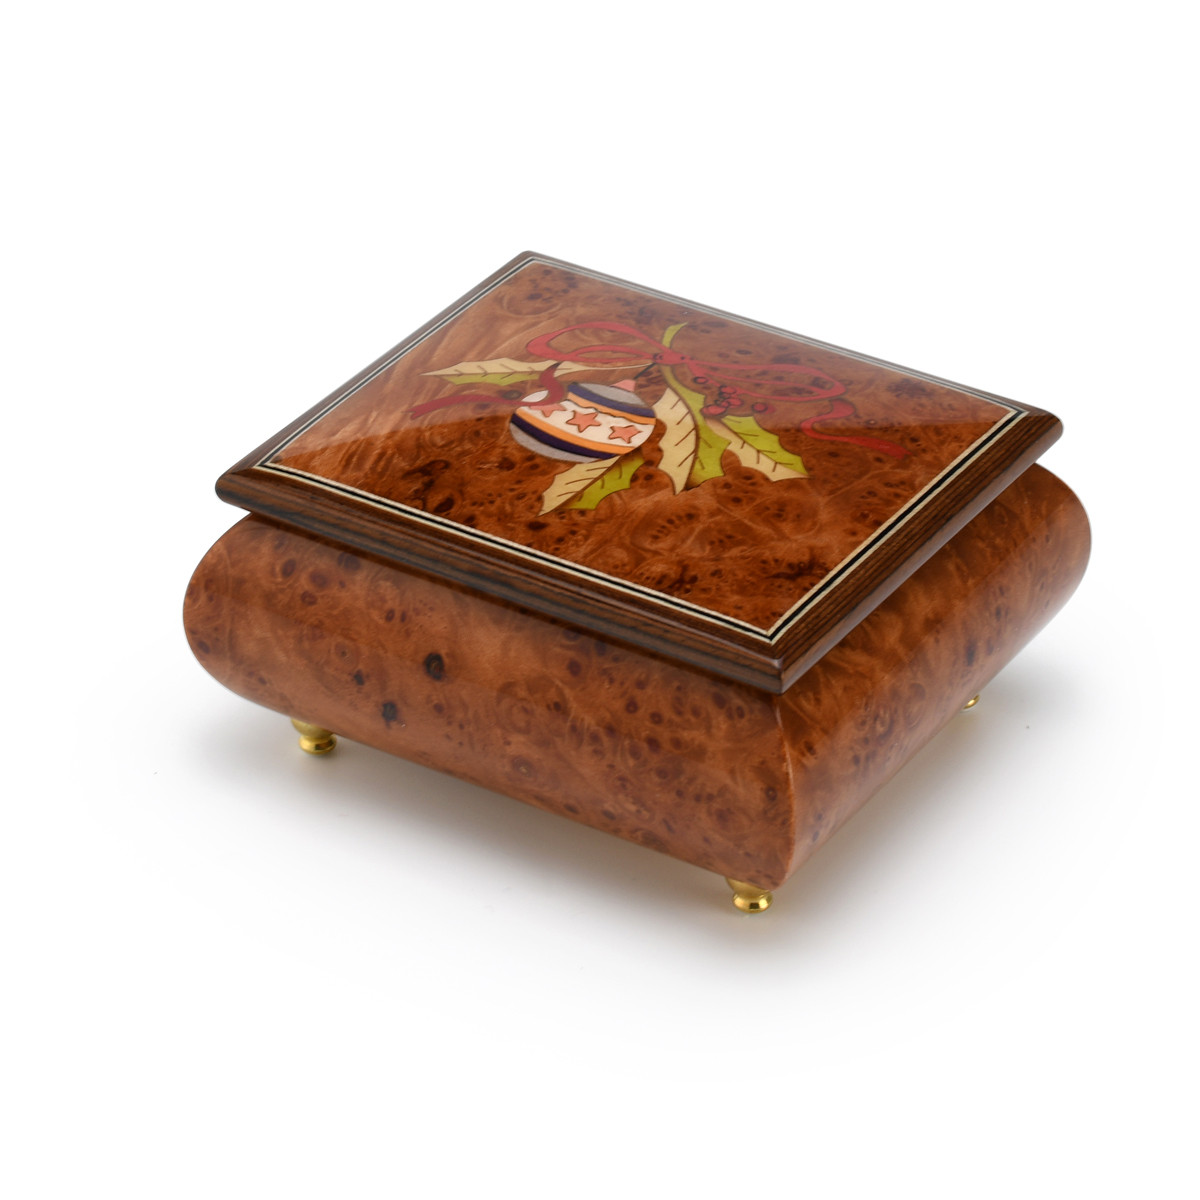 Image of Handcrafted 18 Note Sorrento Music Box with Christmas Ornament Wood Inlay